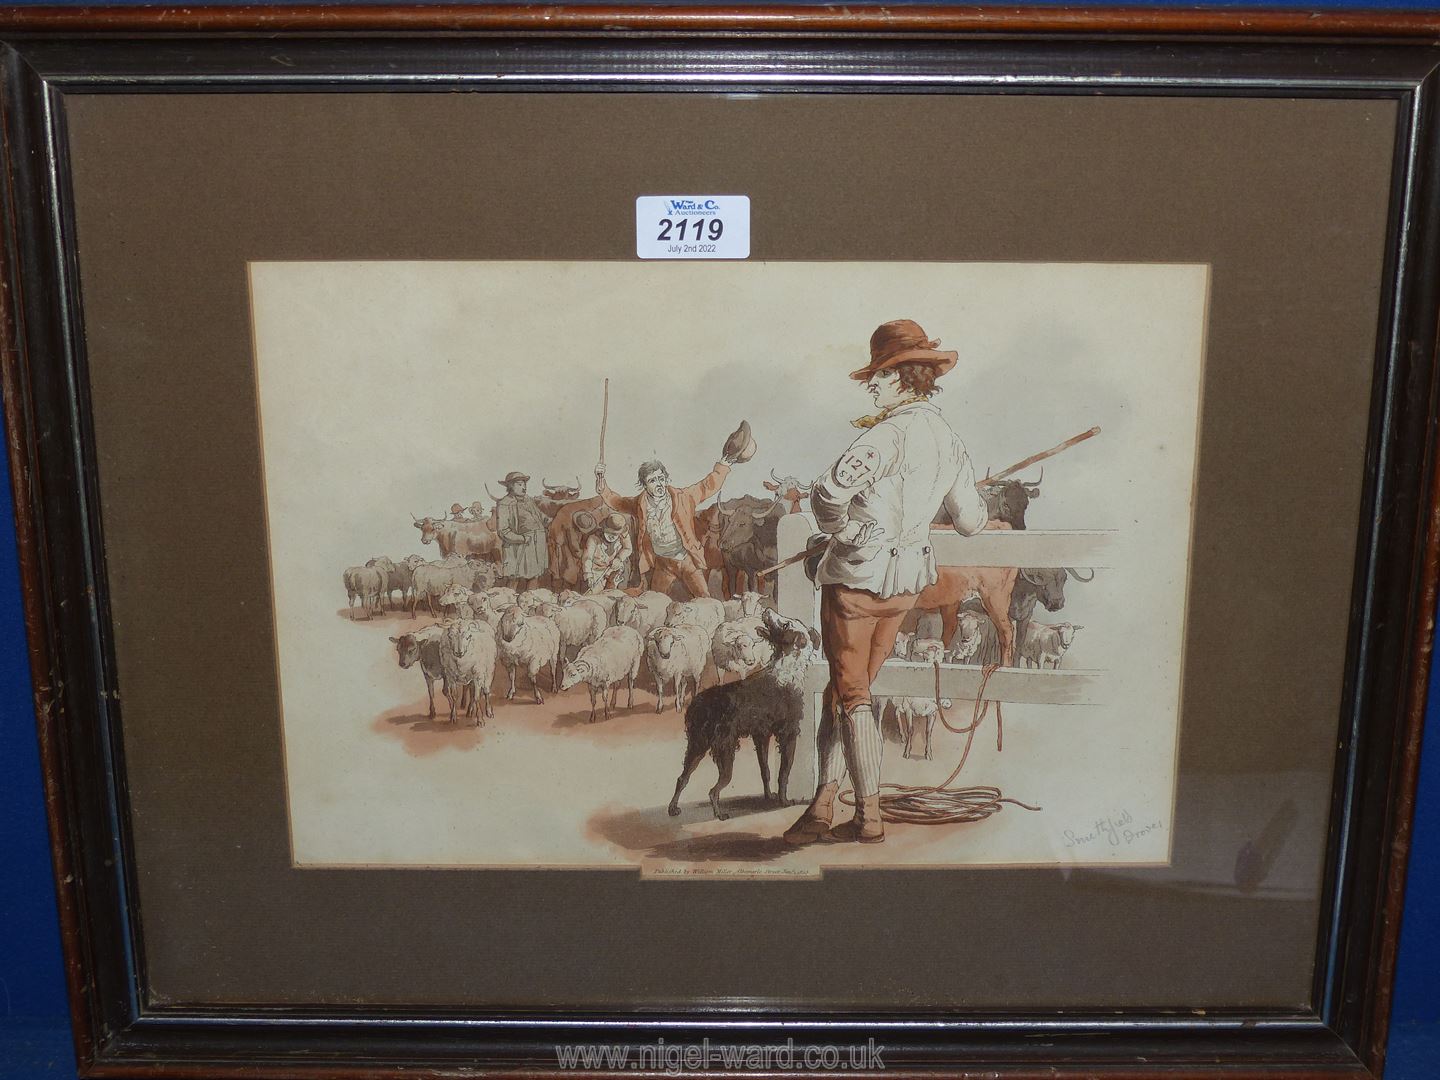 A framed and mounted coloured lithograph titled 'Smithfield Drover' published by William Miller,